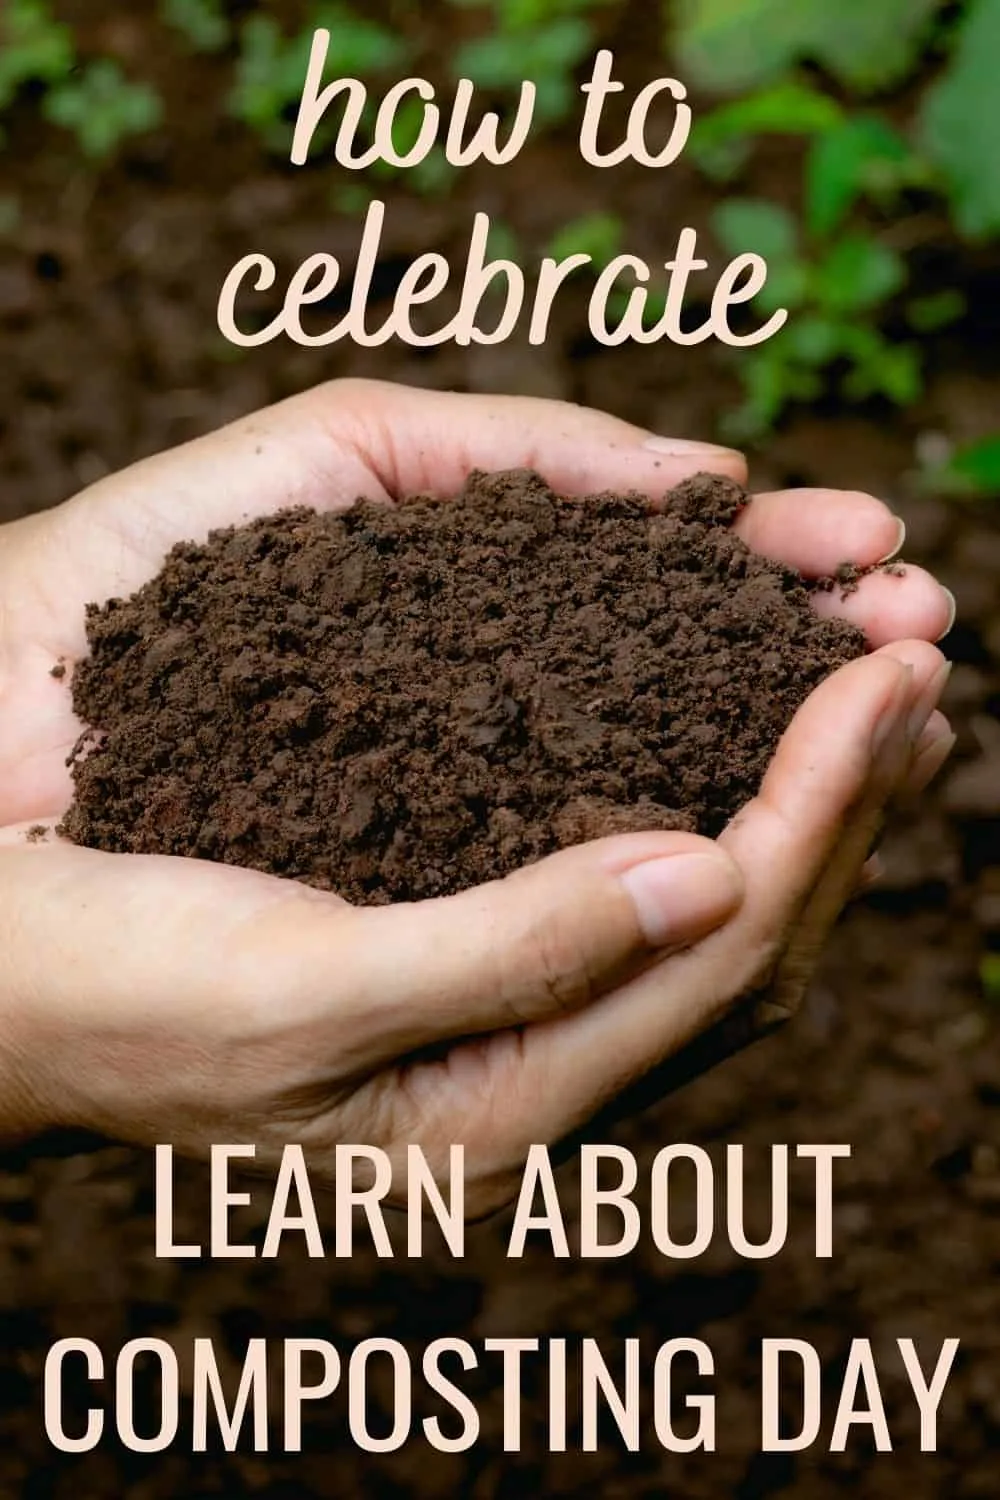 How to celebrate learn about composting day